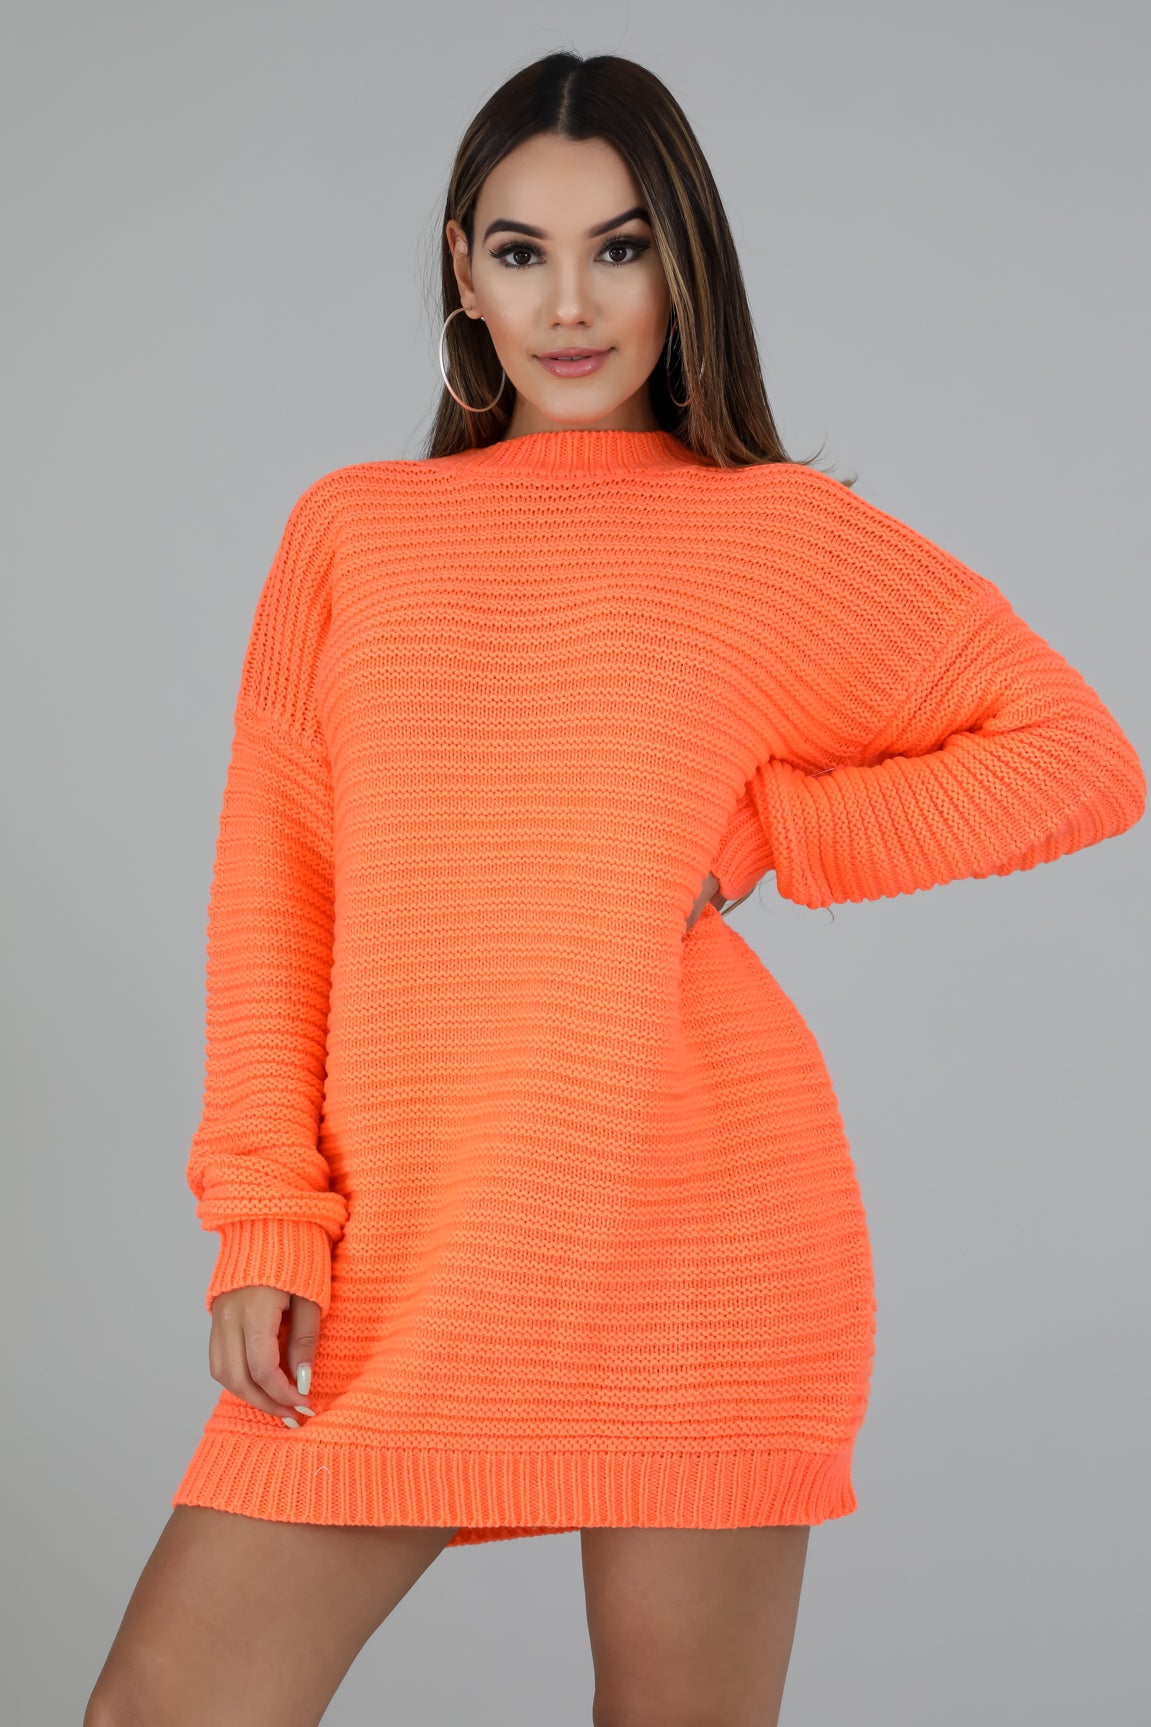 Knit Ribbed Sweater Dress | GitiOnline